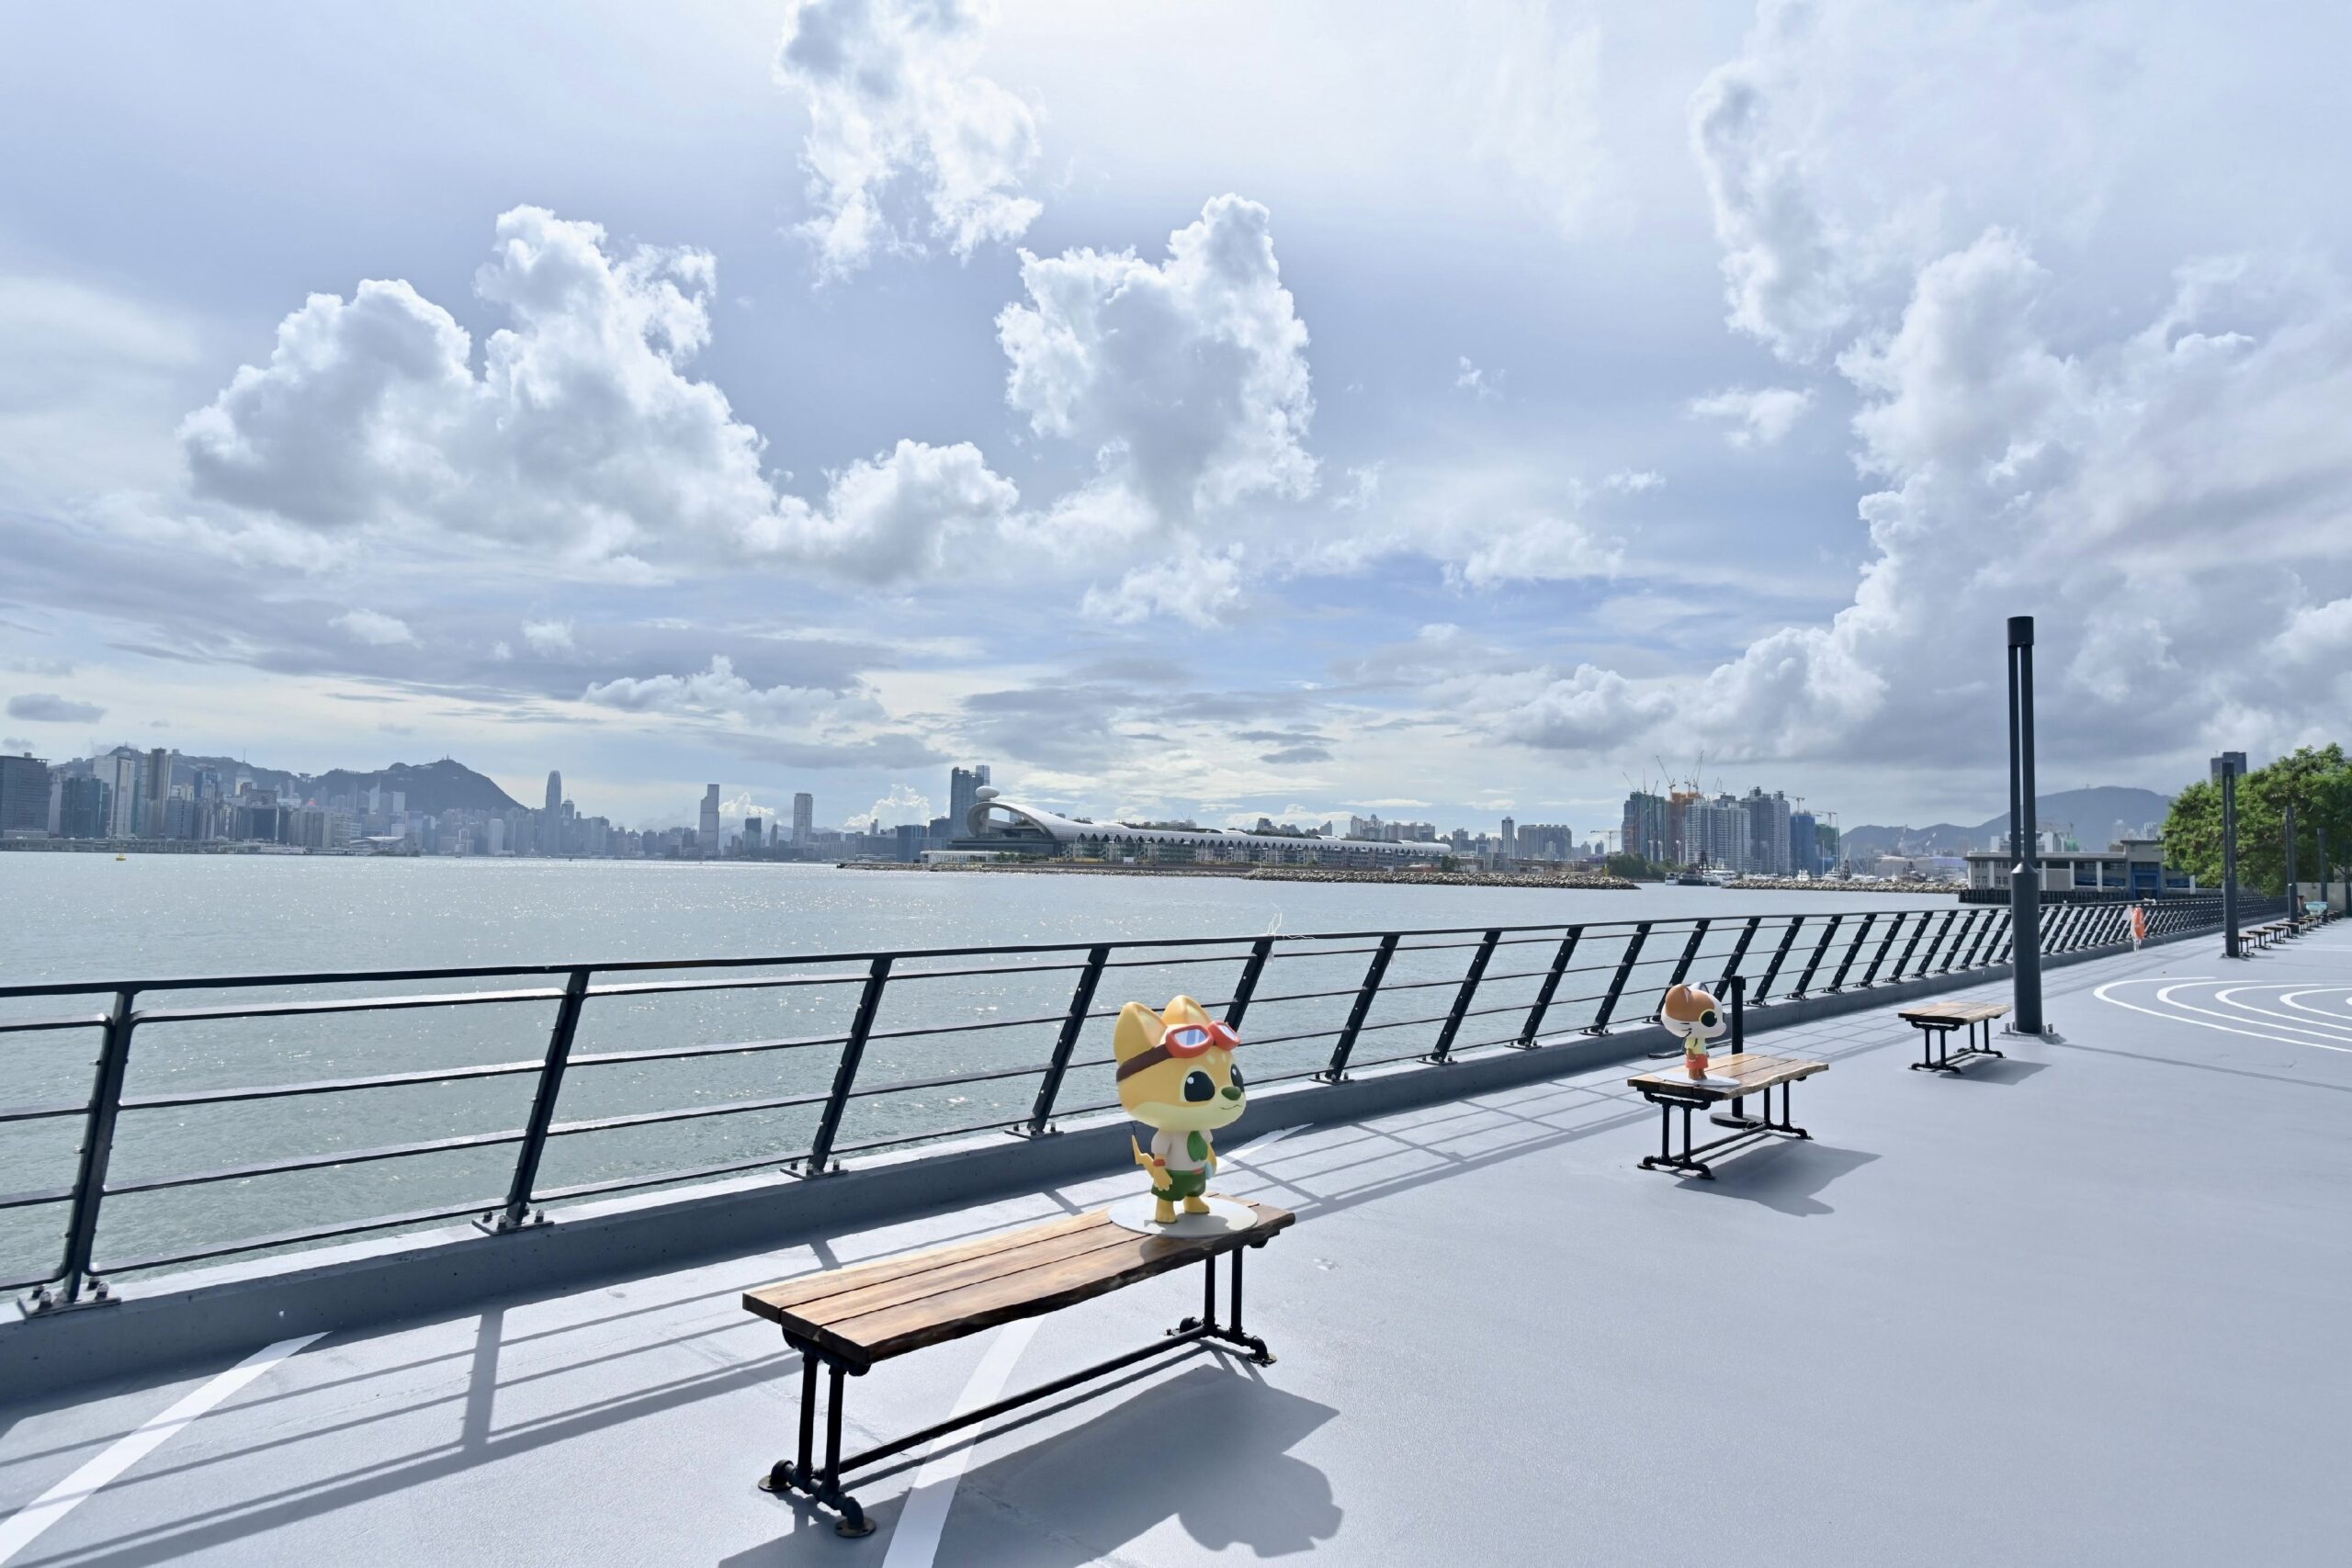 Benches on the Tsui Ping Seaside with cartoon animal figures. The walkway overlooks the Kai Tak Cruise Terminal.